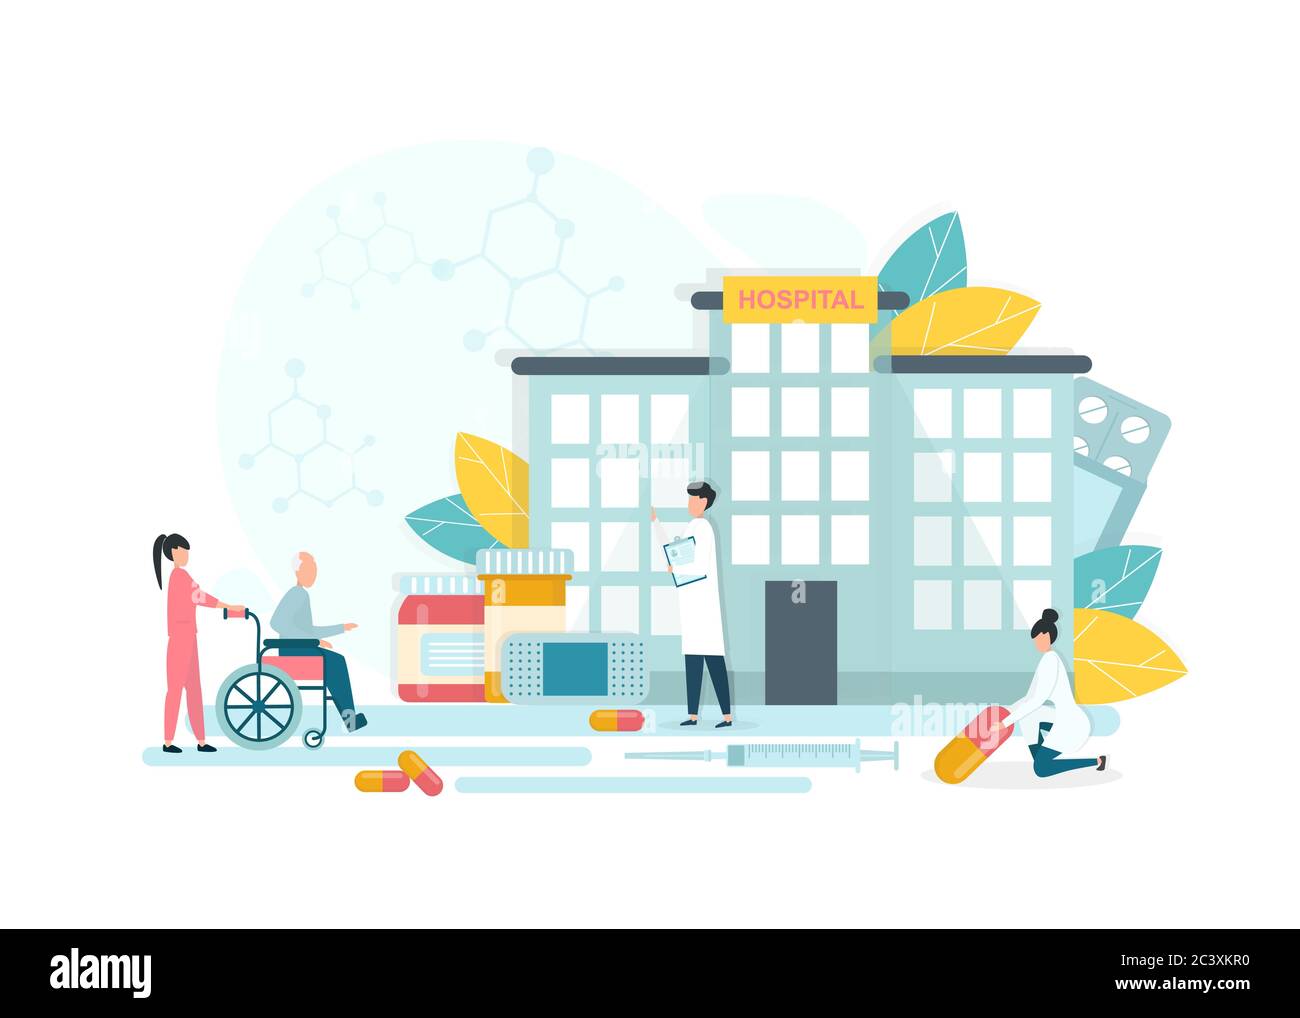 Vector Illustration Of Modern Hospital Exterior With Doctors, Nurse And Disabled Patient Stock Vector